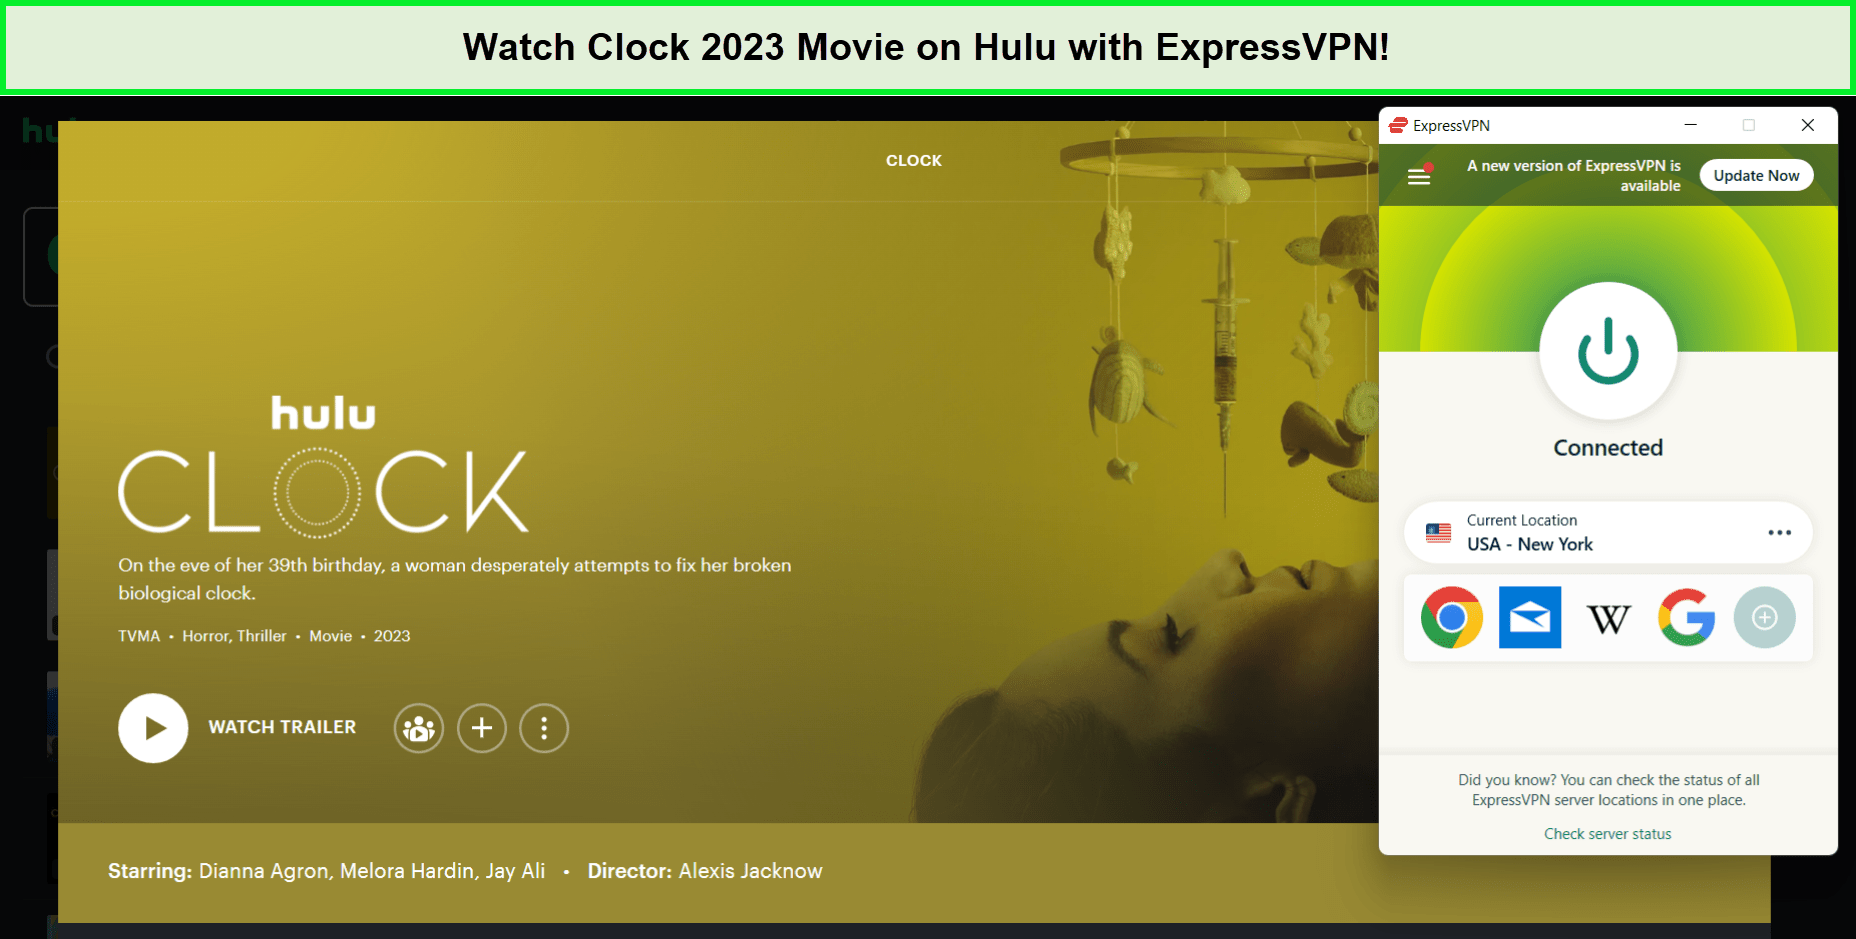 With-ExpressVPN-Watch-Clock-2023-Movie-on-Hulu-in-Italy